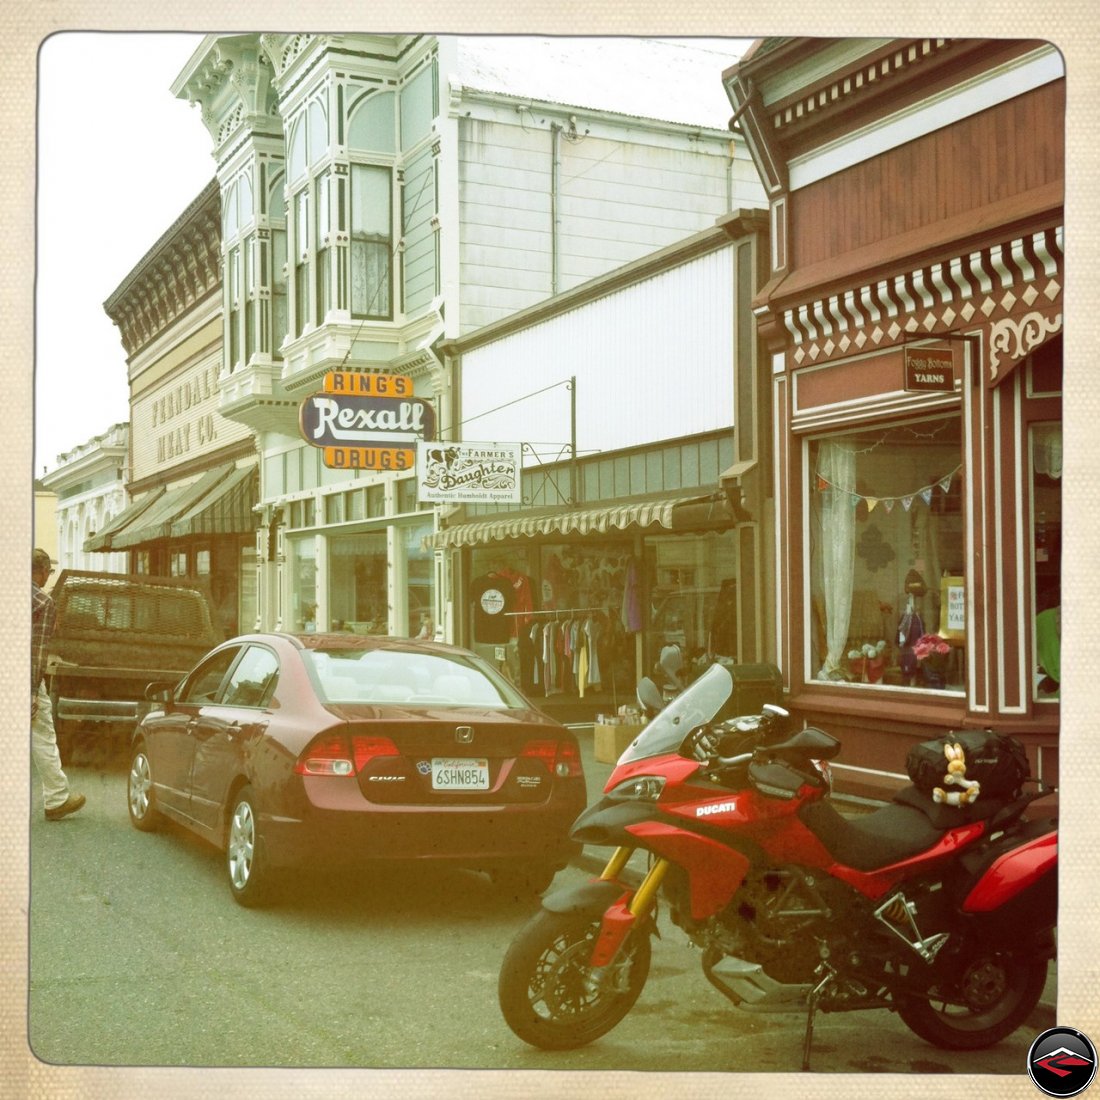 a Ducati Multistrada 1200 parked on historic main street in Ferndale, California, and a sign for Rings Rexall Drugs and Farmers Daughter